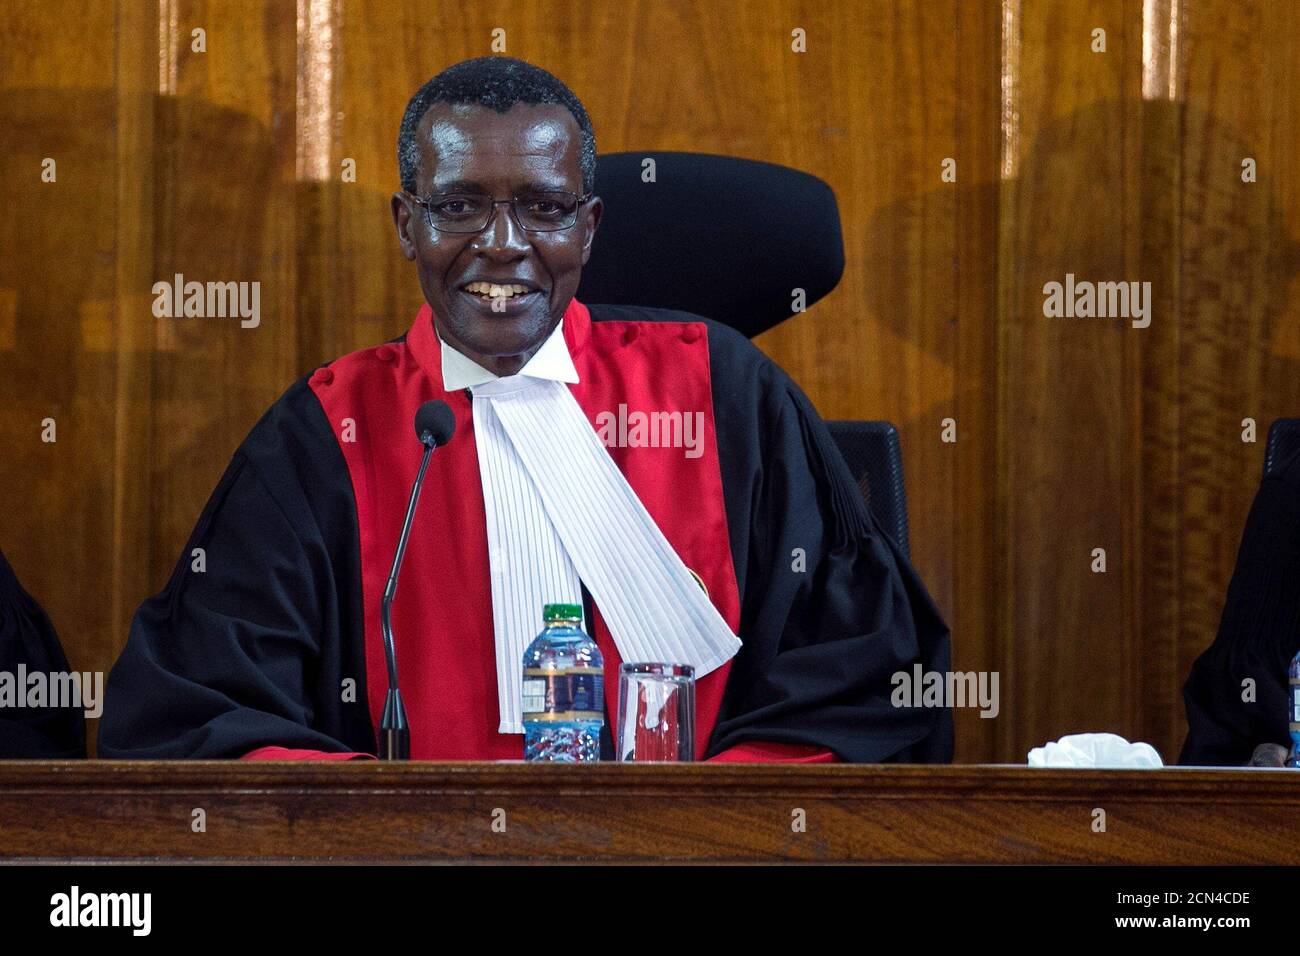 Kenya's Supreme Court judge chief justice David Maraga attends a hearing regarding petitions challenging the result of  the presidential election rerun at Kenya's Supreme Court in Nairobi, Kenya November 14, 2017. REUTERS/Baz Ratner Stock Photo